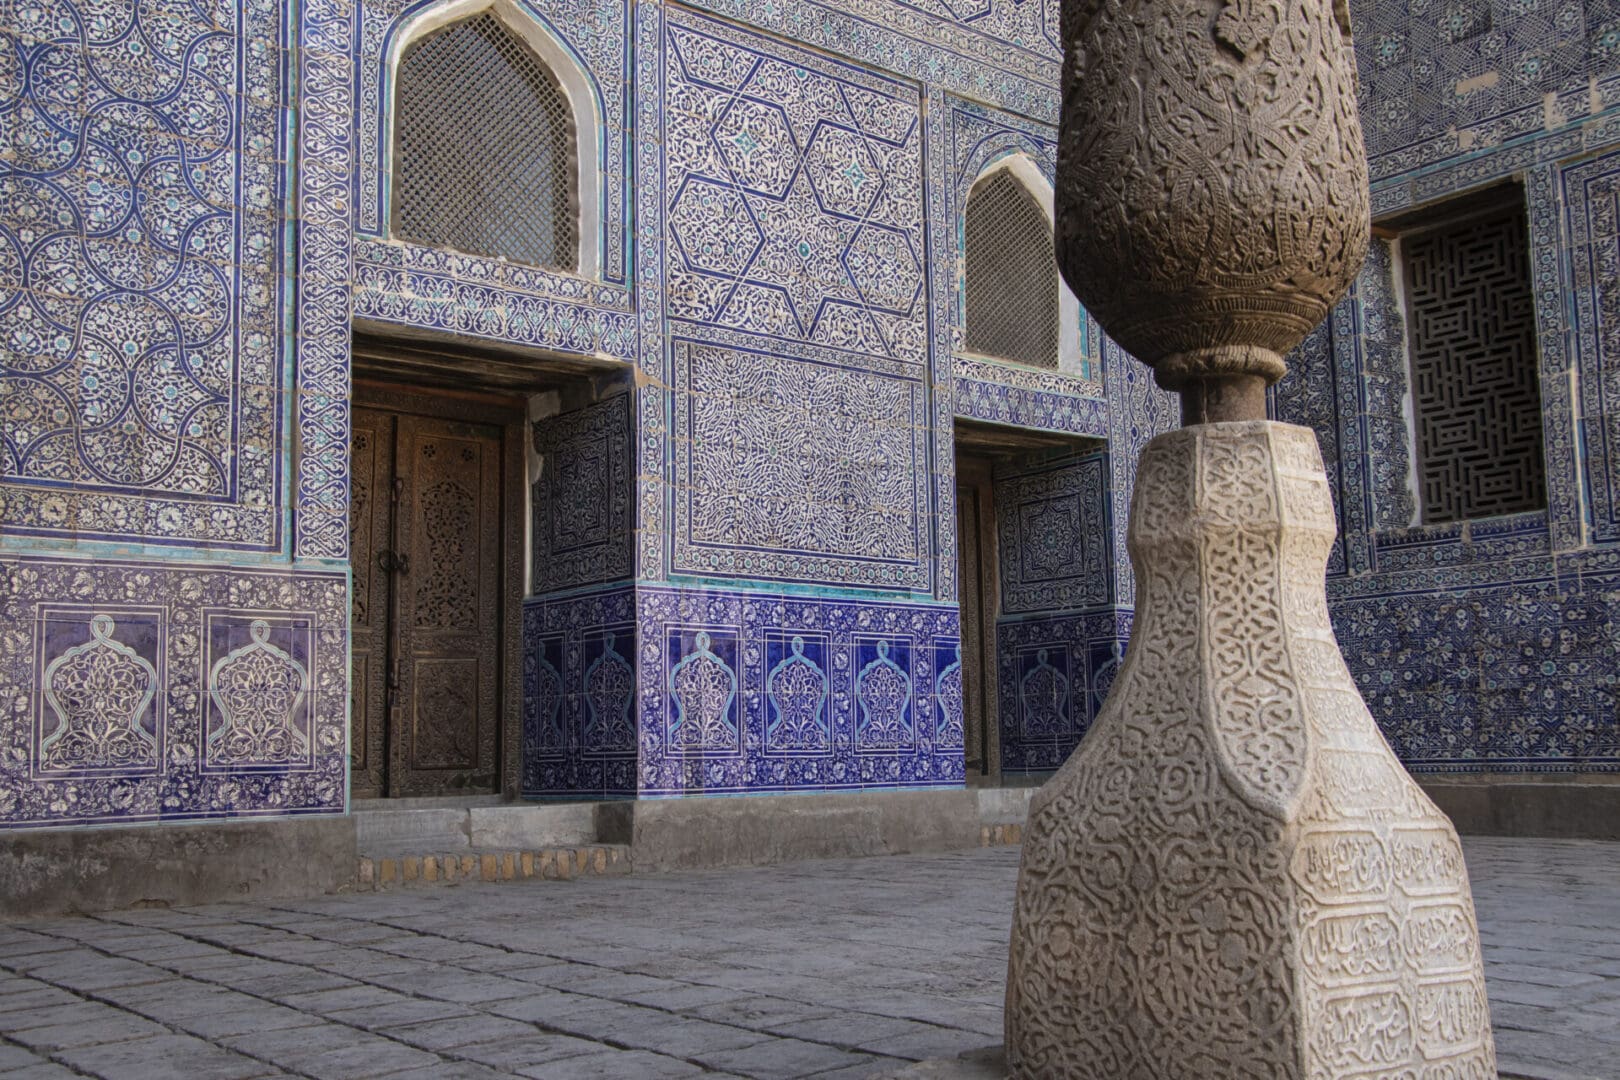 A blue tiled building with a pillar in front of it.